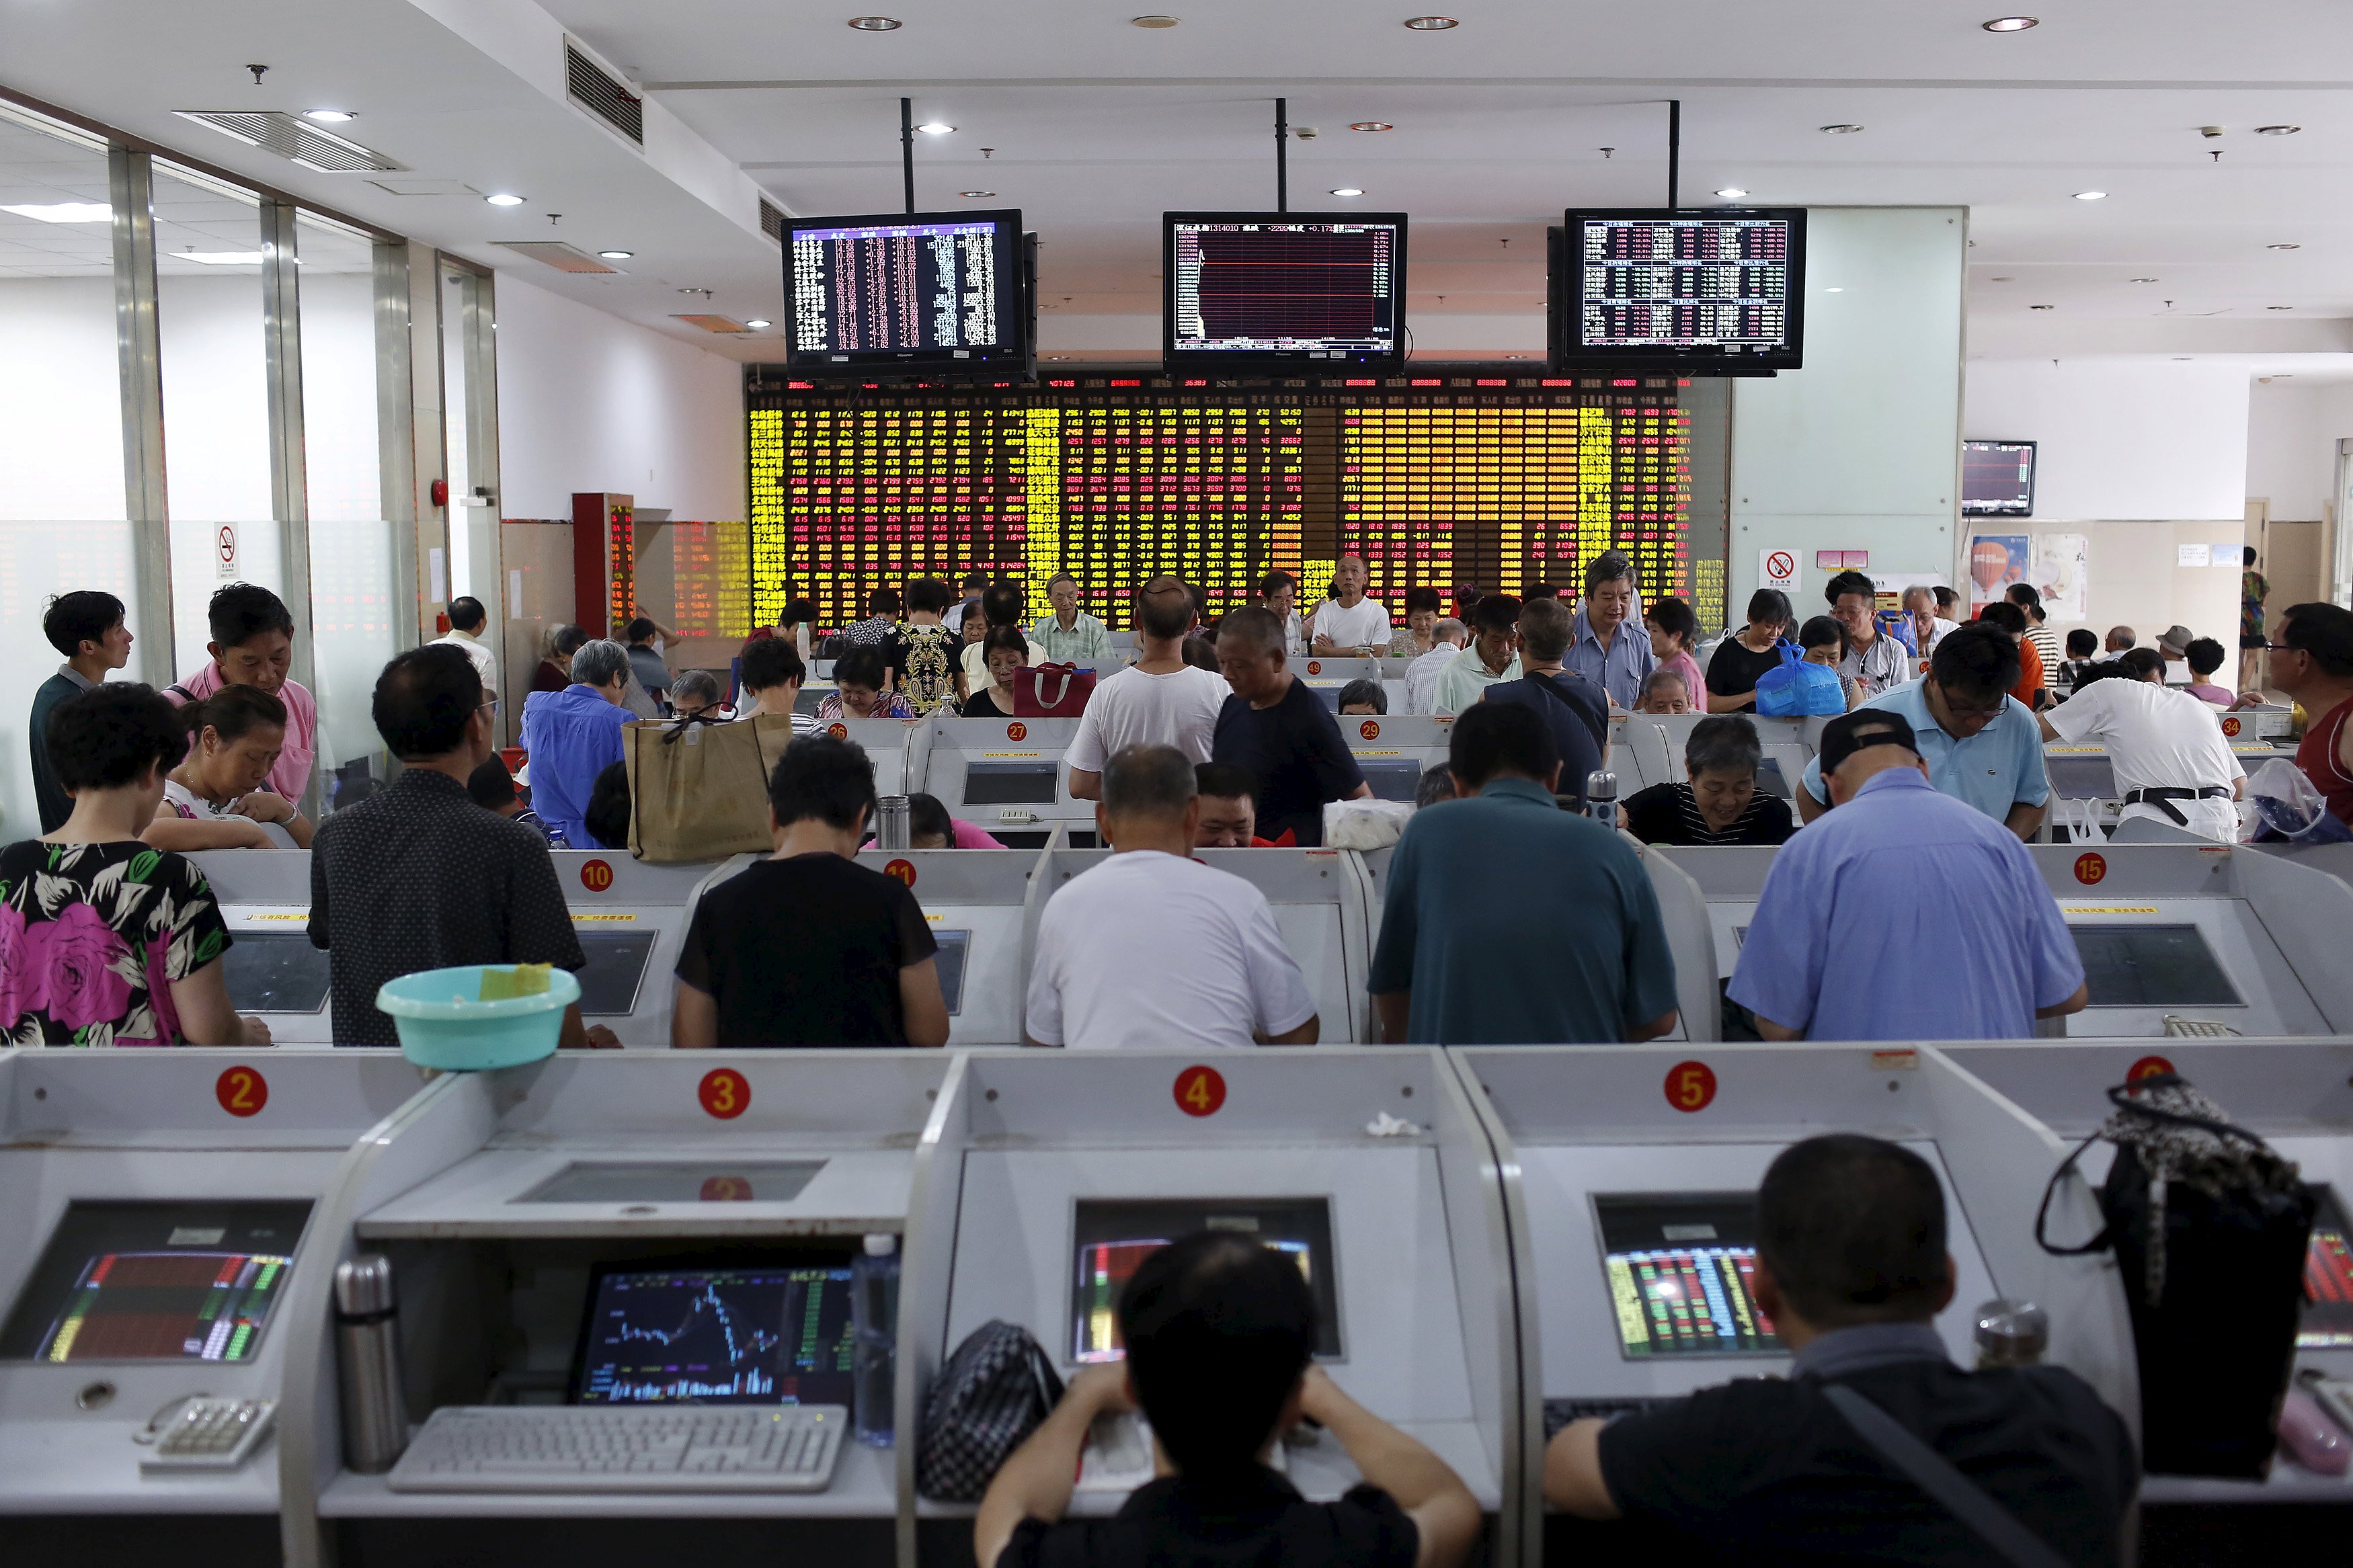 Dozens of investors study their computer screens at a stock brokerage in ShanghaI, China. Photo: Reuters